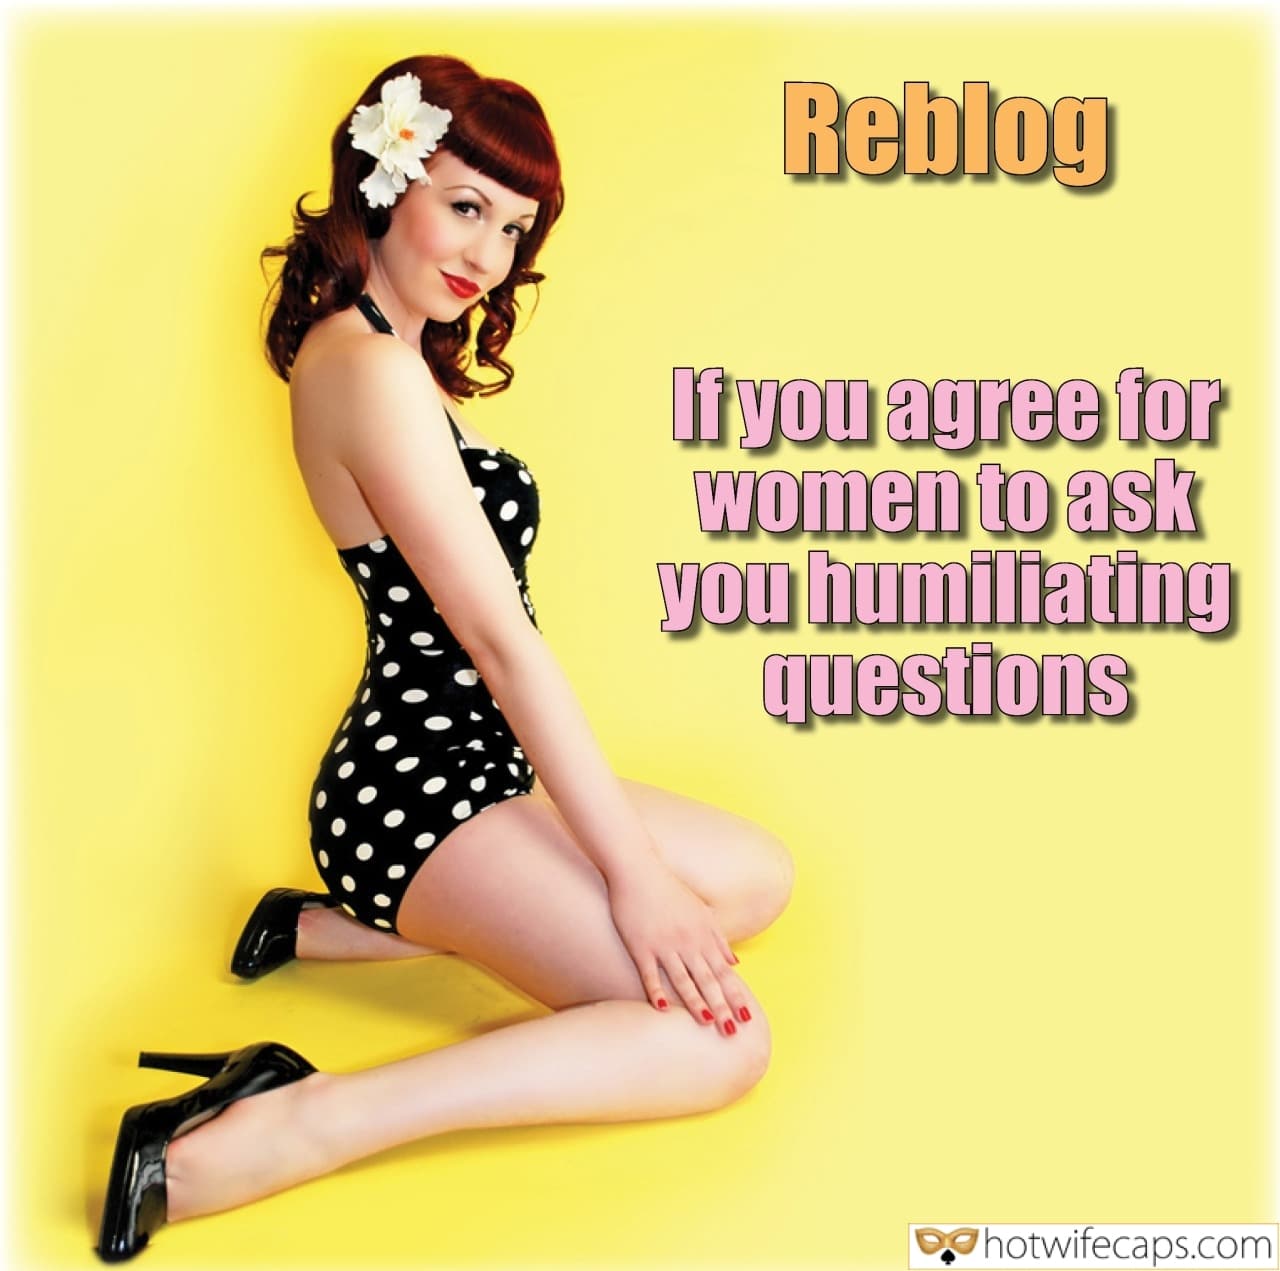 Sexy Memes Humiliation Cuckold Cleanup hotwife caption: Reblog If you agree for women to ask you humiliating questions Pinup Babe in a Black Dress